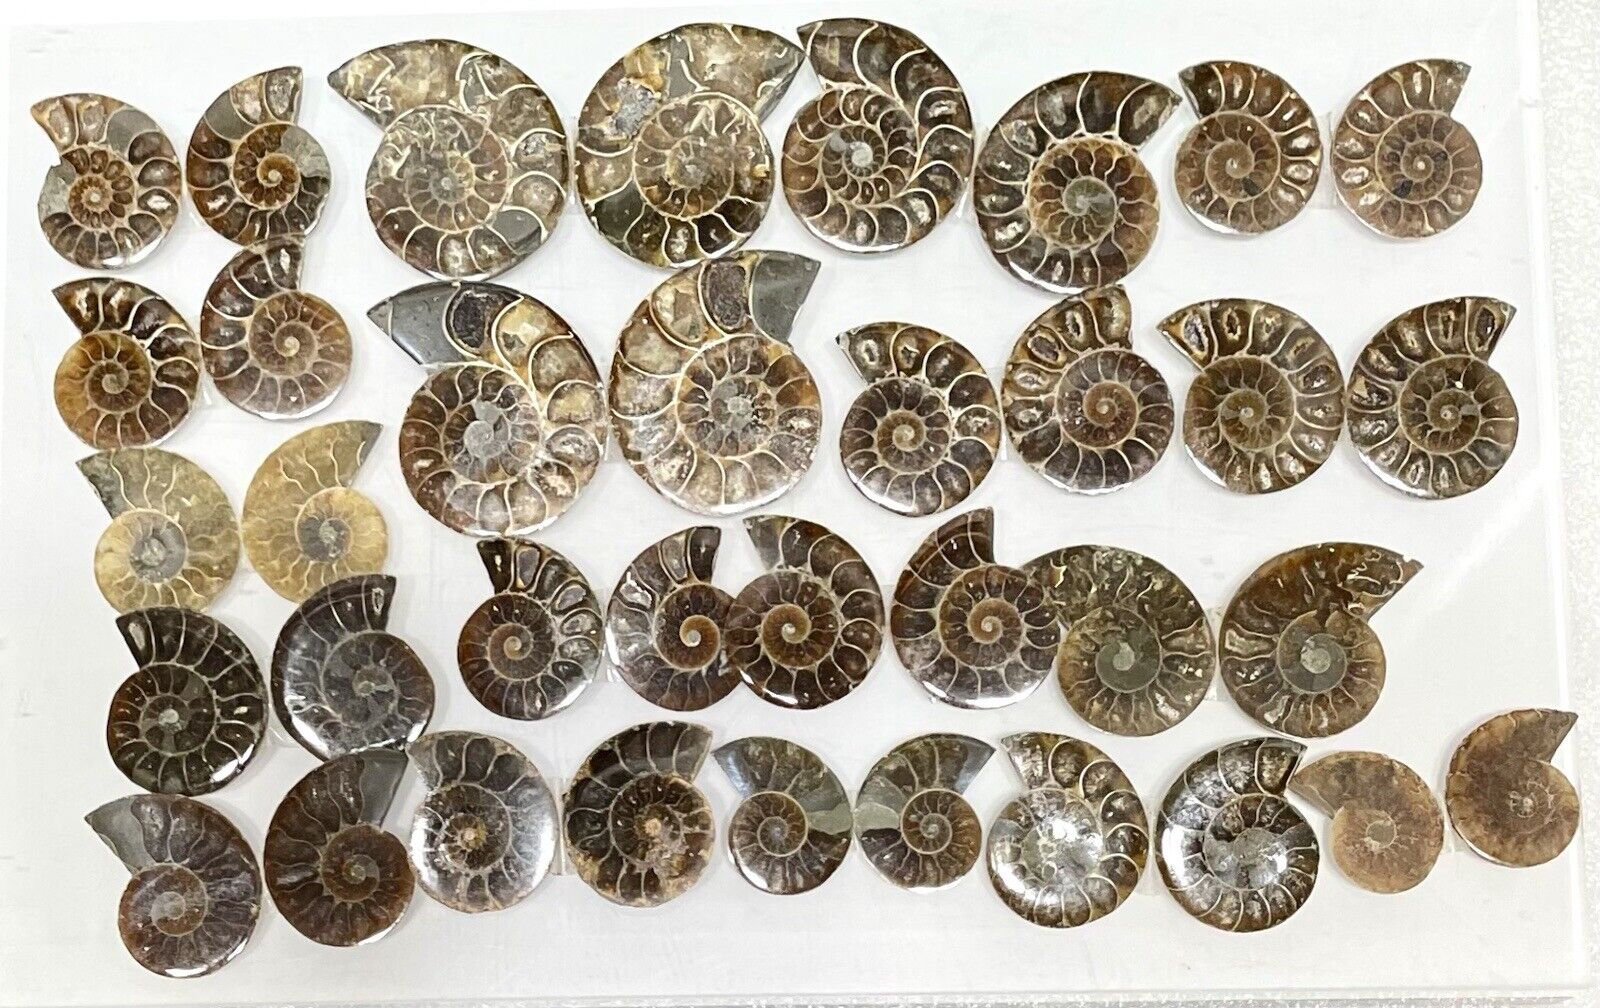 Wholesale Lot 1 Lb Natural Ammonite Fossil Crystal Healing Energy